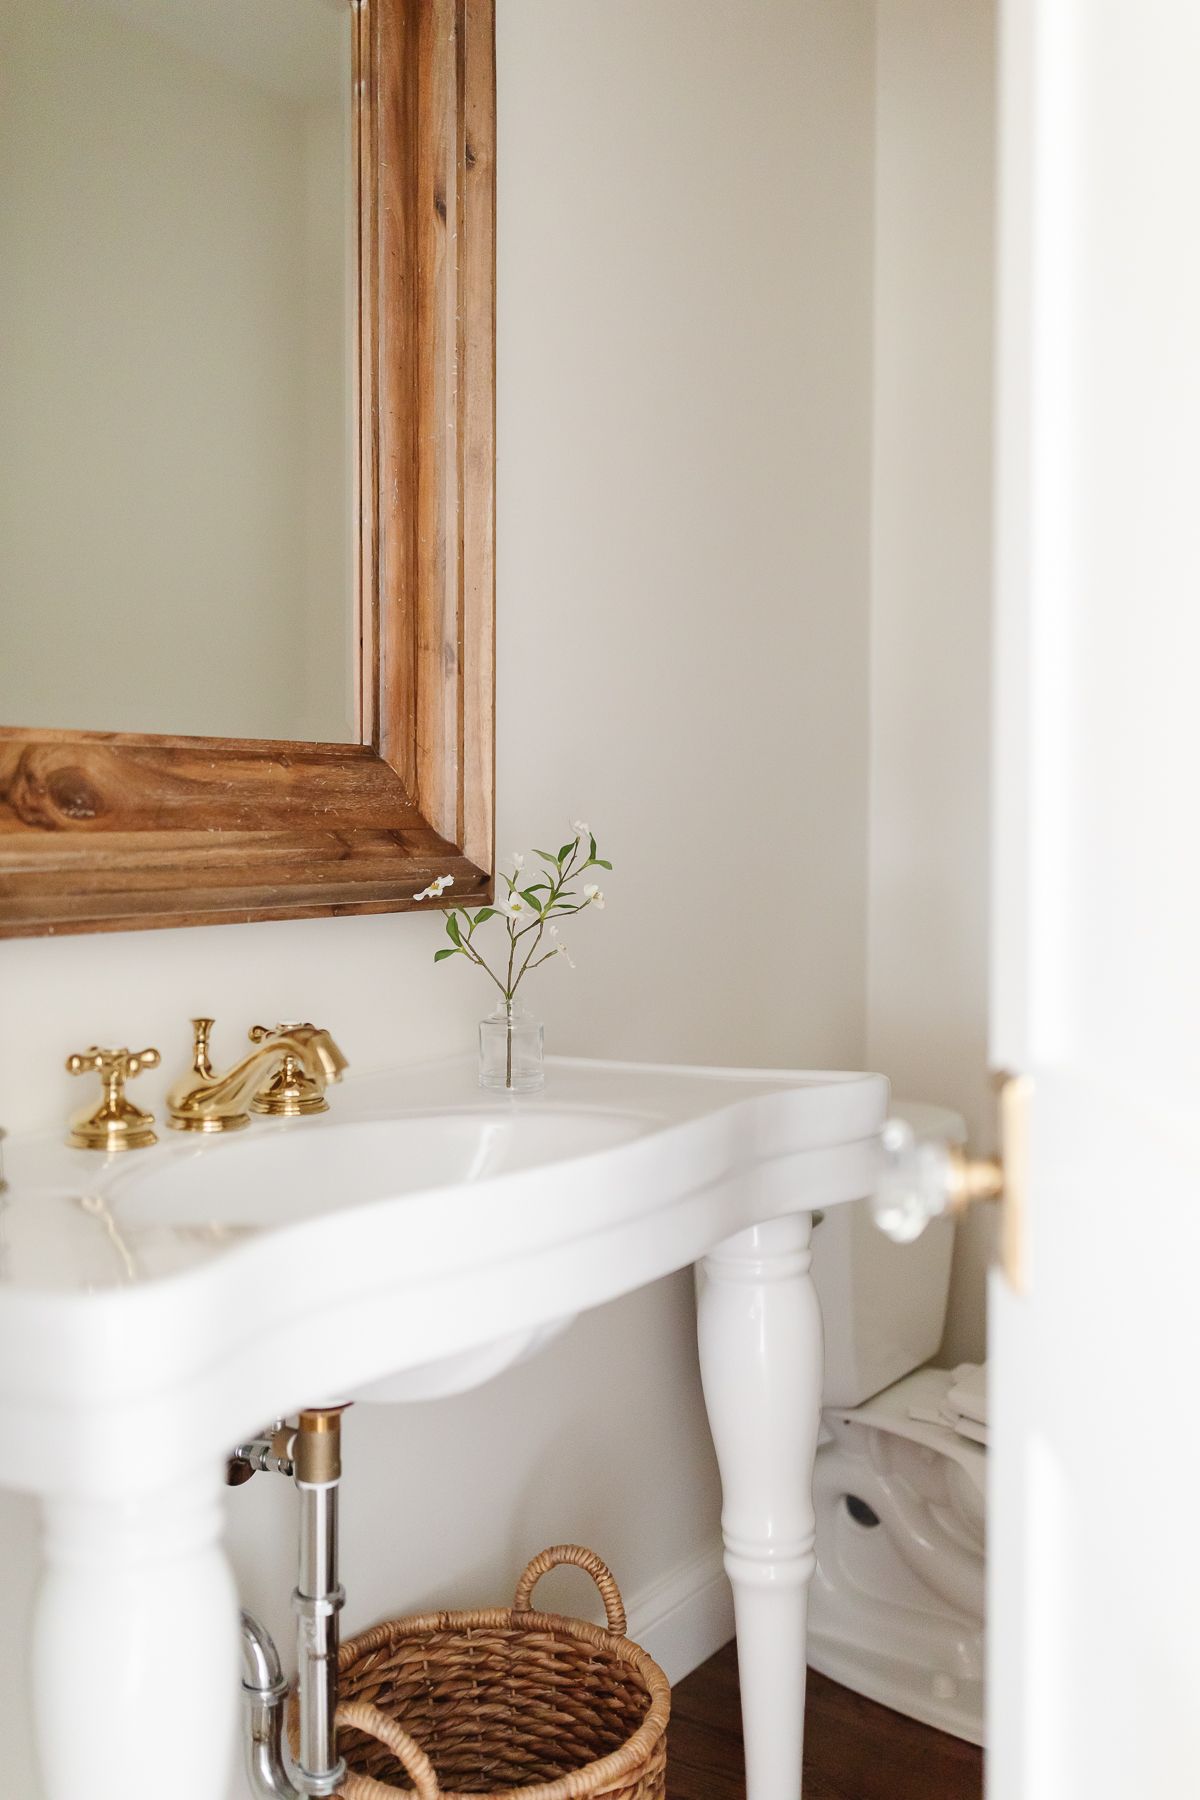 A bathroom with a pedestal sink and wooden mirror